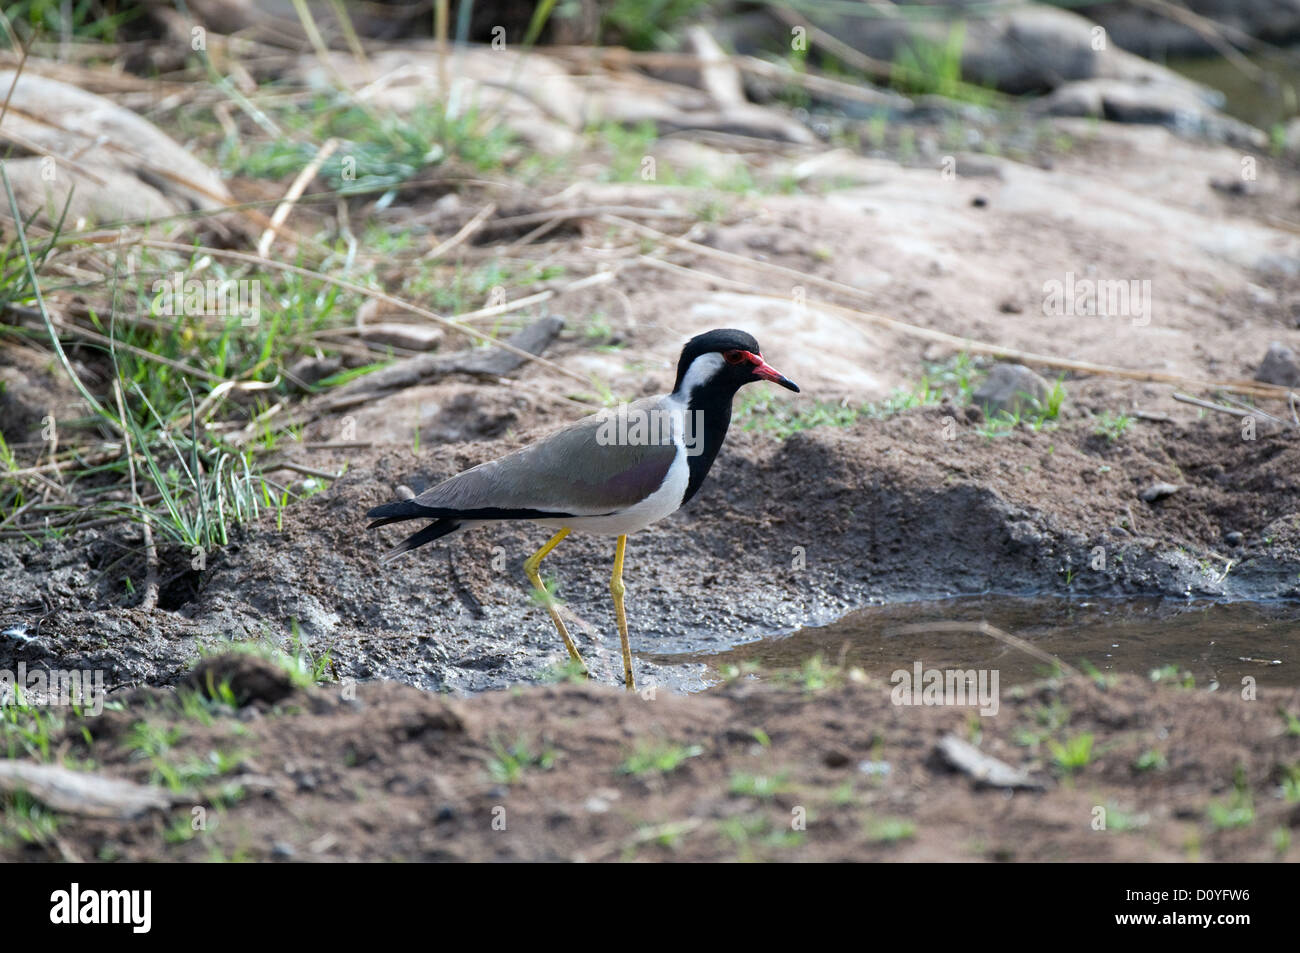 Red wattled lapwing by stream Stock Photo